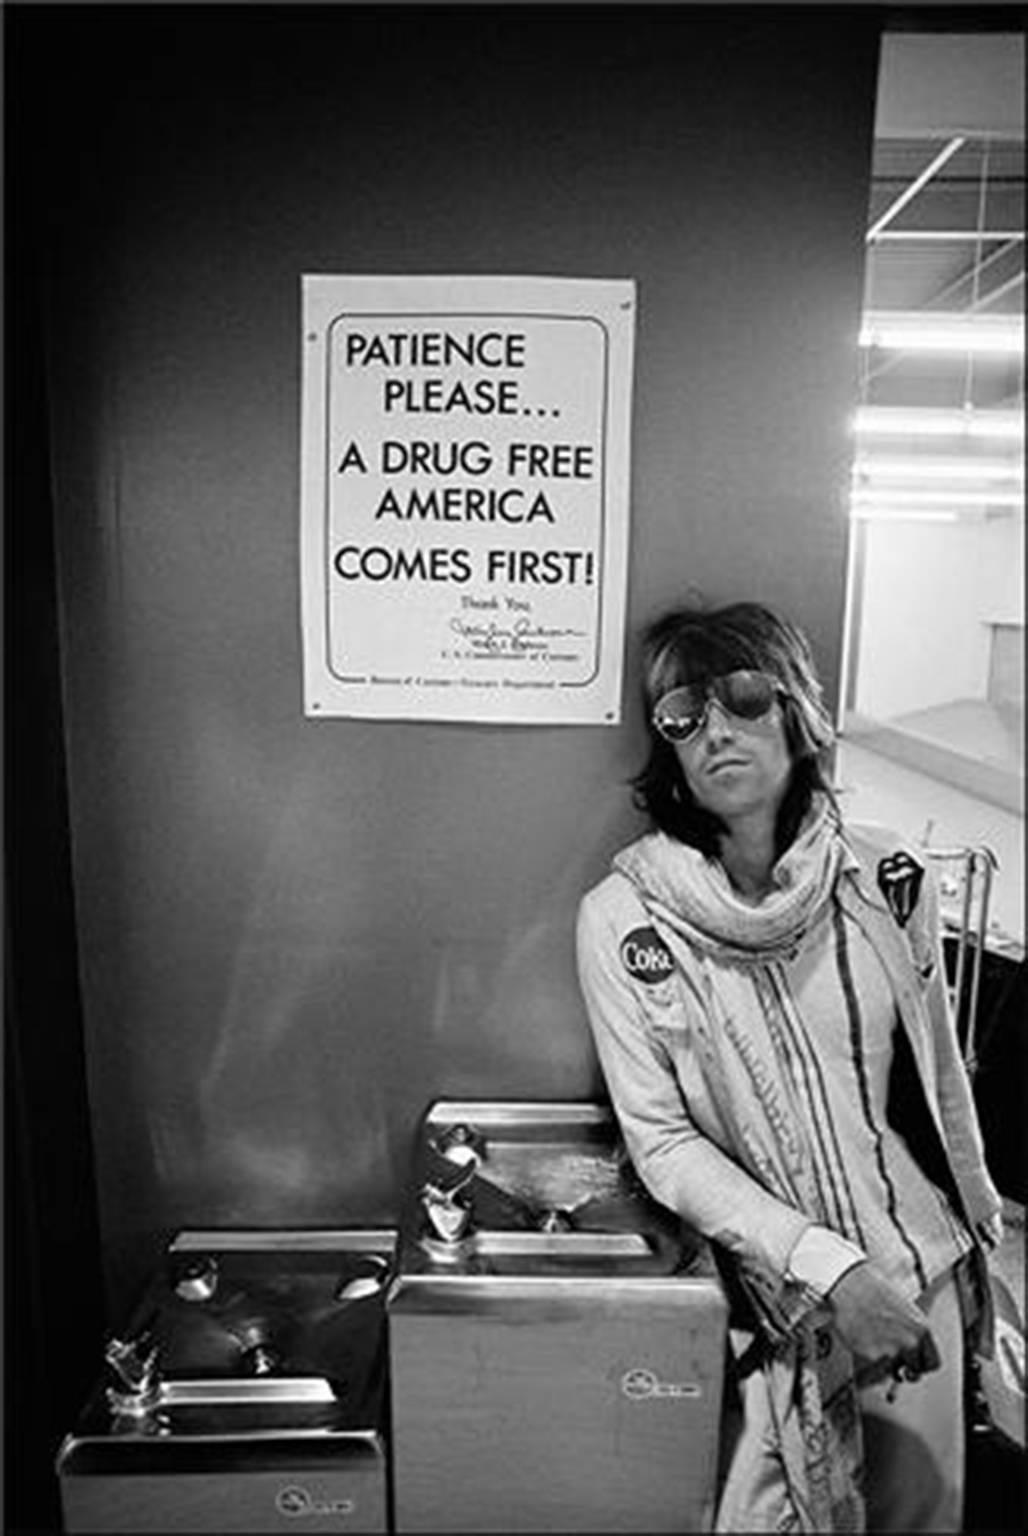 Ethan Russell Black and White Photograph - Keith Richards, "Patience Please", 1972 U.S. Tour